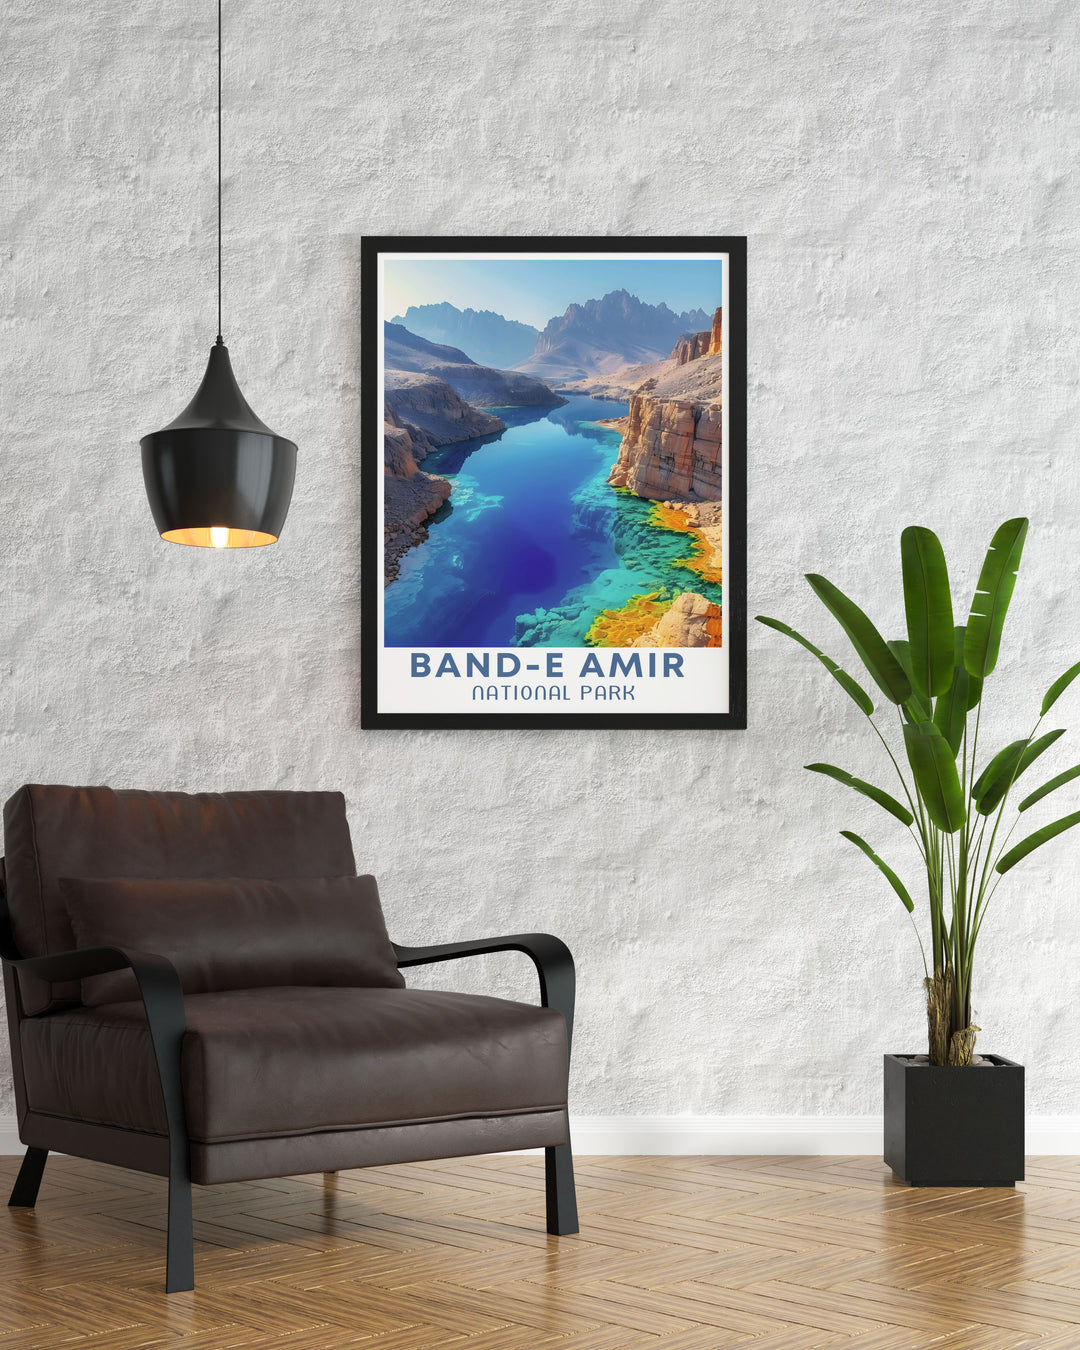 Beautiful Band e Amir National Park wall art depicting the parks stunning scenery ideal for adding elegance and sophistication to any room in your home or office